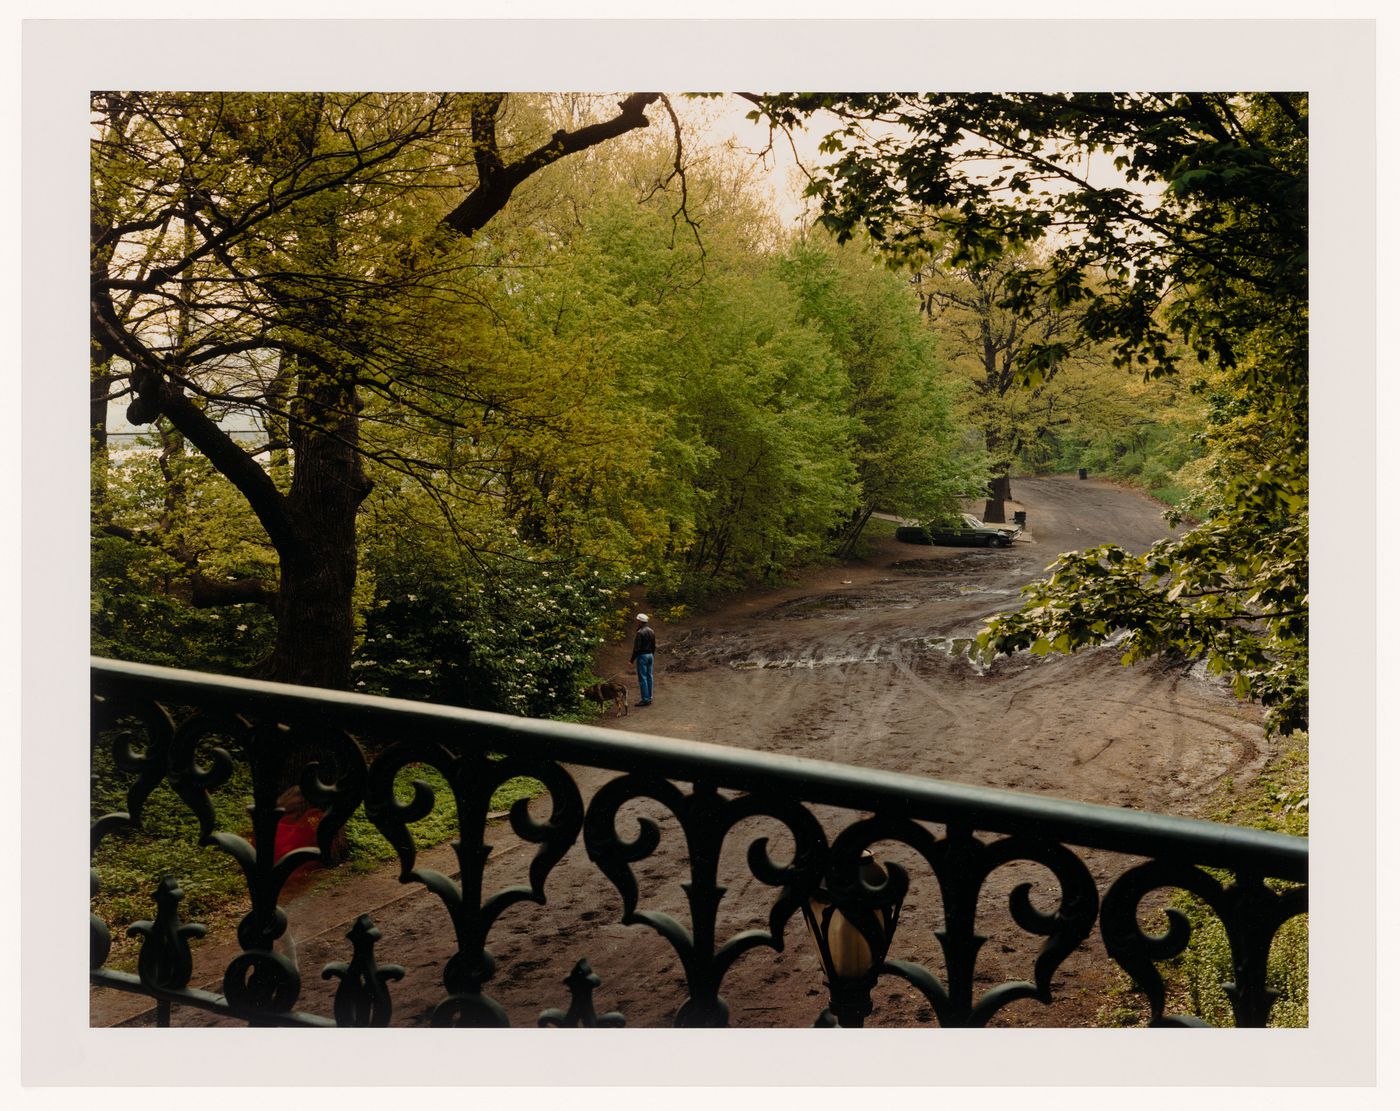 Viewing Olmsted: View of The Bridle Path, Central Park, New York City, New York